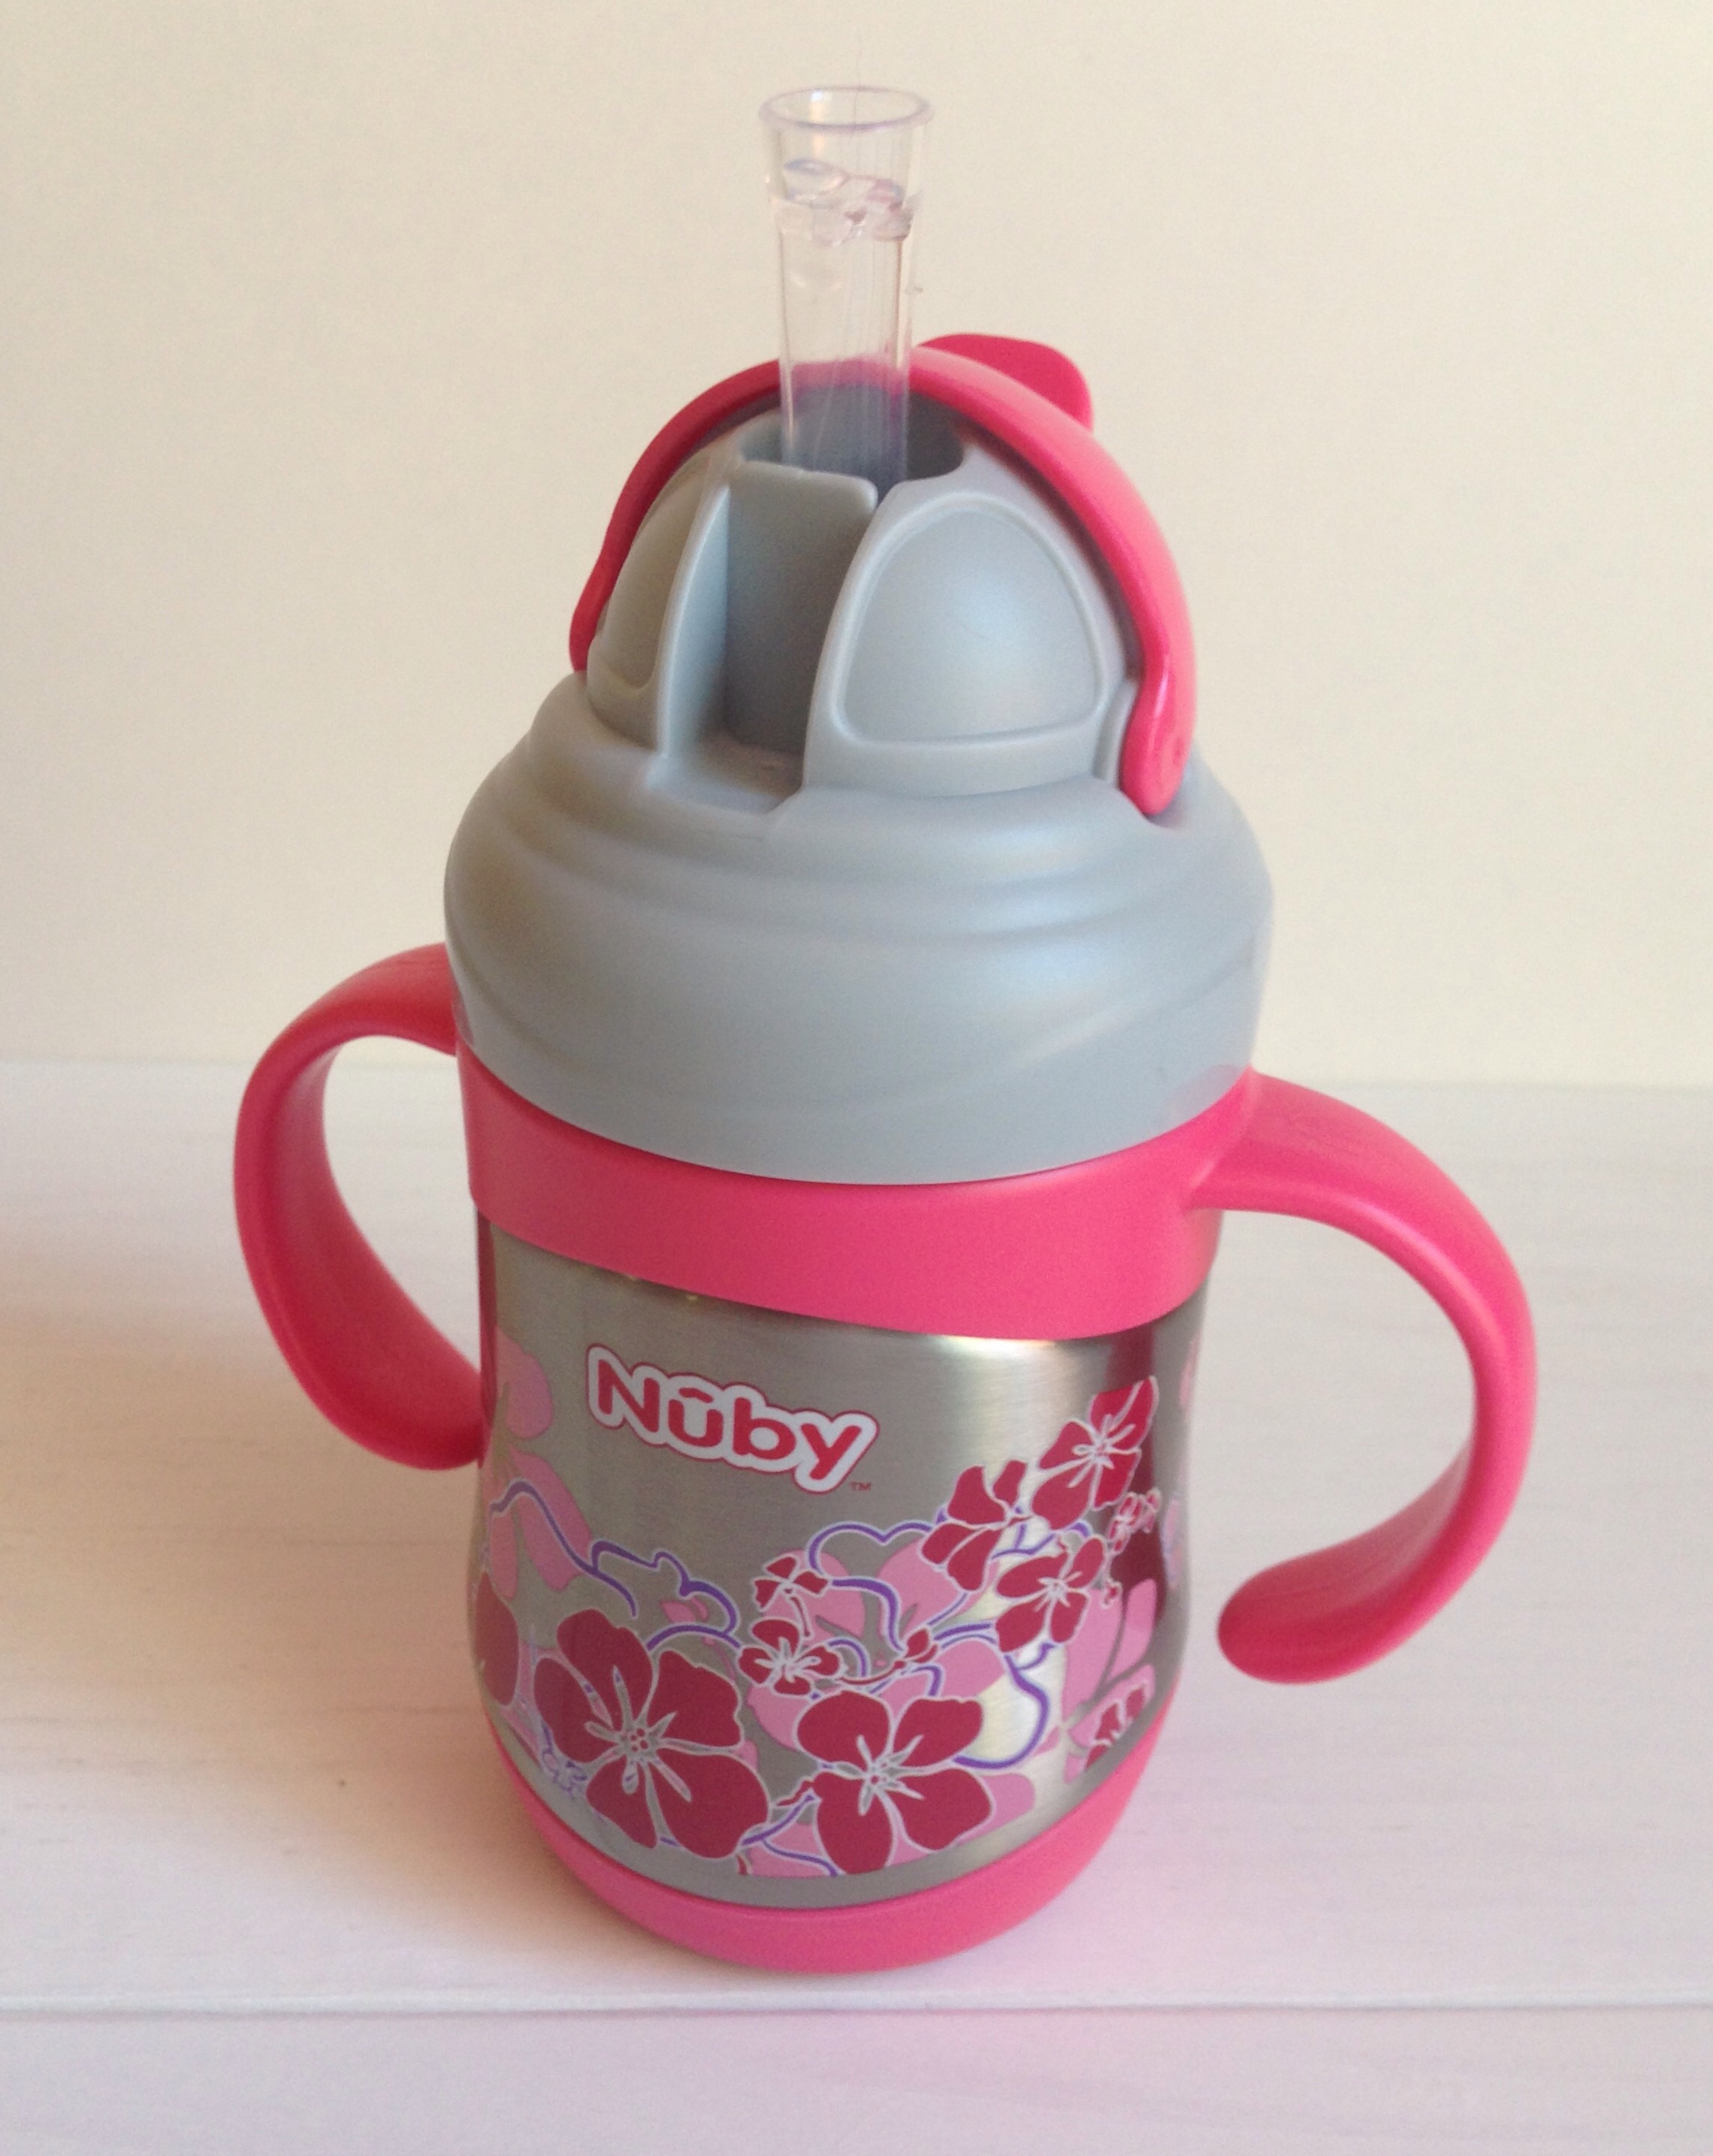 Nuby No-Spill Straw Sippy Cup Reviews